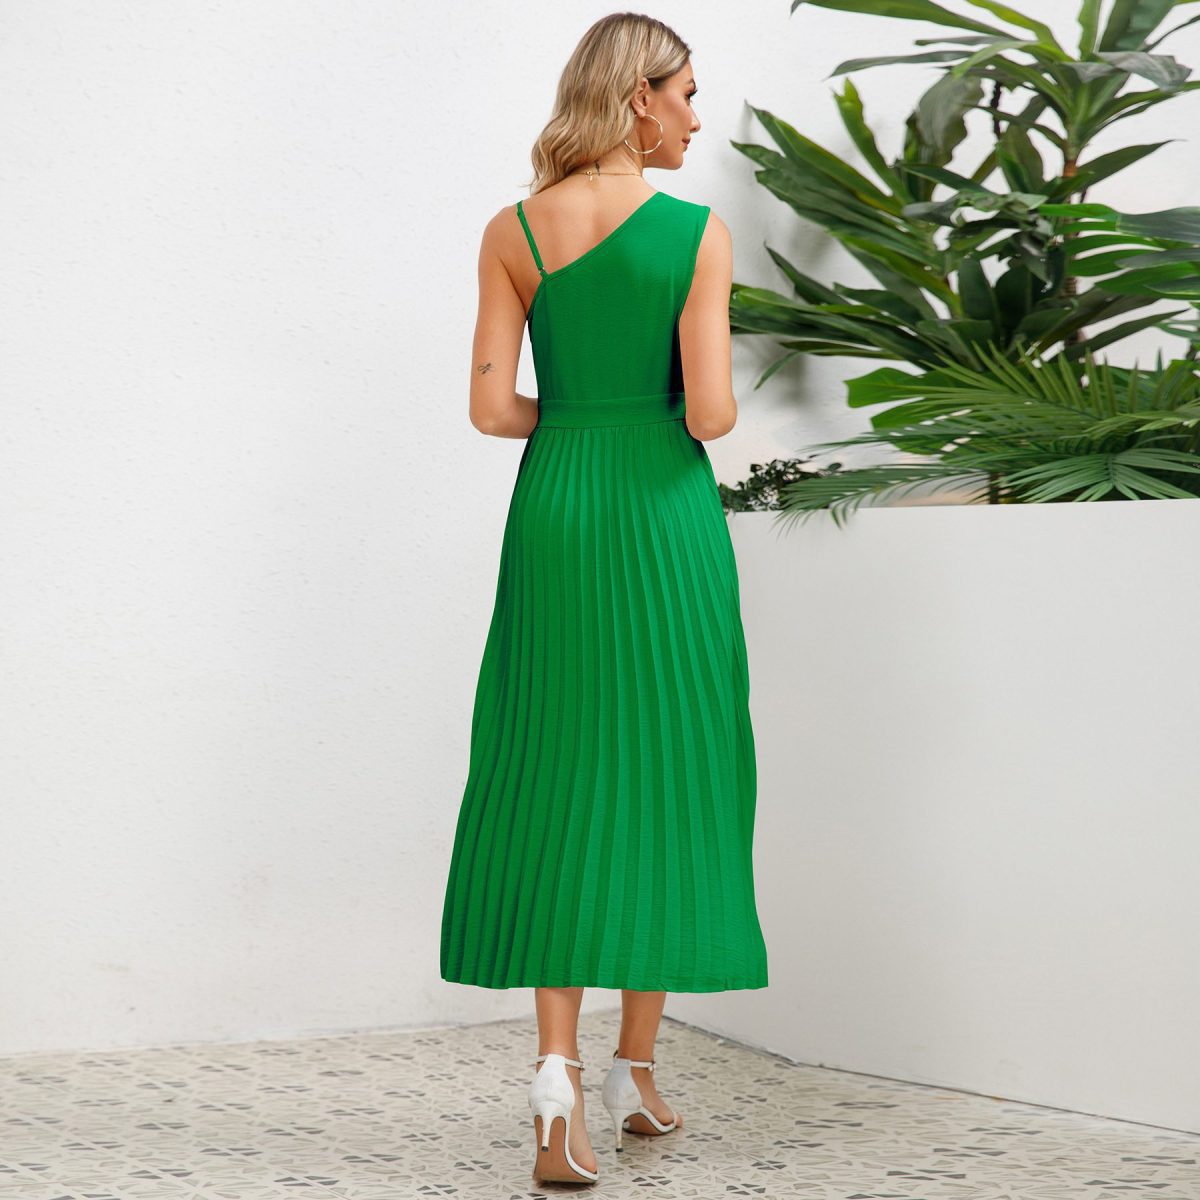 Sexy Slim Mid Length Pleated A Line Dress in Dresses